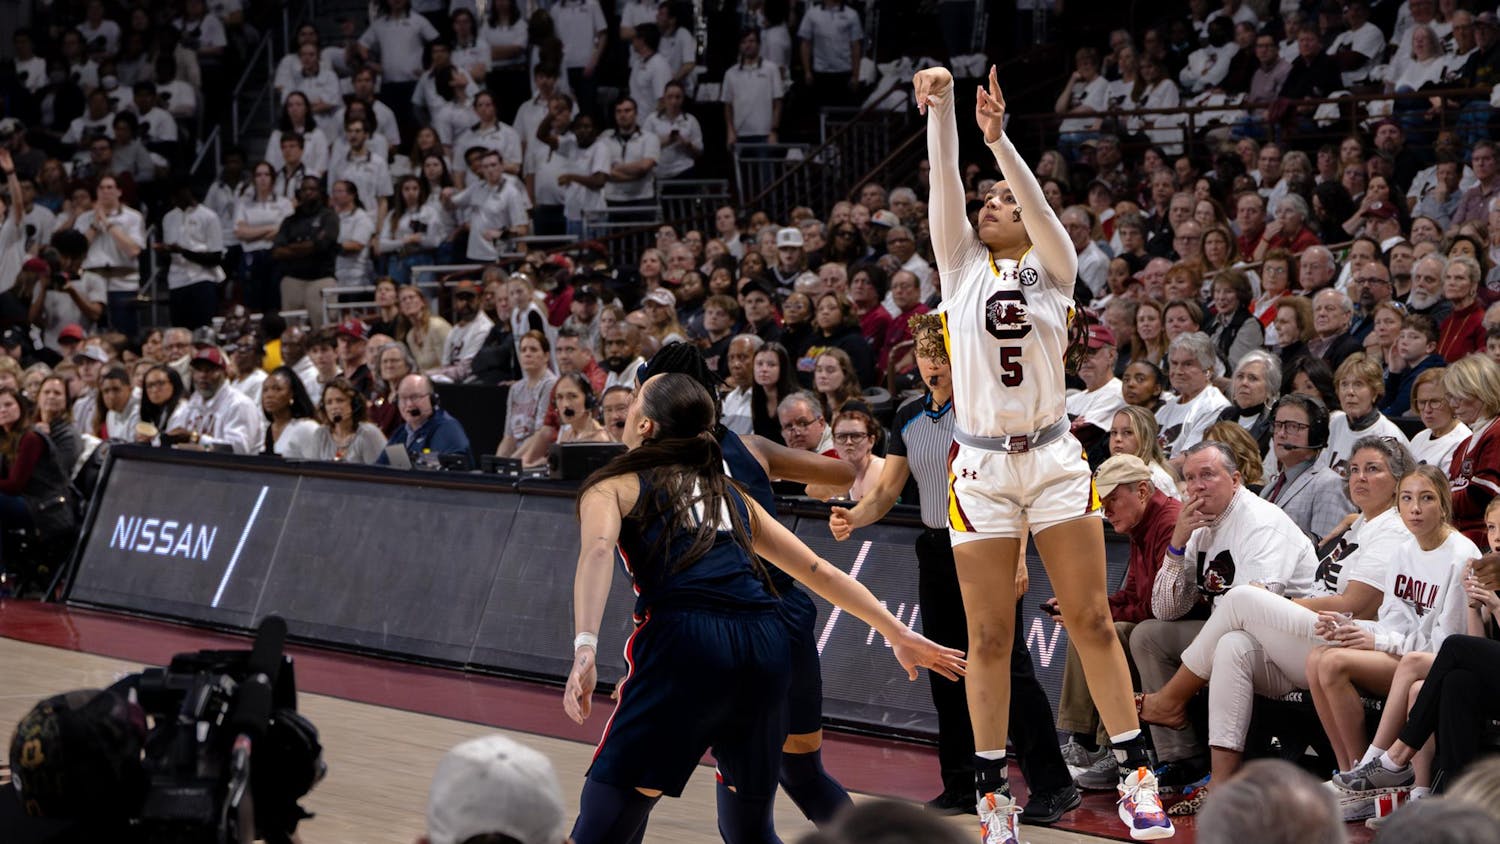 Freshman guard Tessa Johnson attempts a 3-point shot during the Gamecocks' 83-65 victory over the Huskies on Feb. 11, 2024. Johnson scored 9 points for the Gamecocks during her 15 minutes playing at Colonial Life Arena.